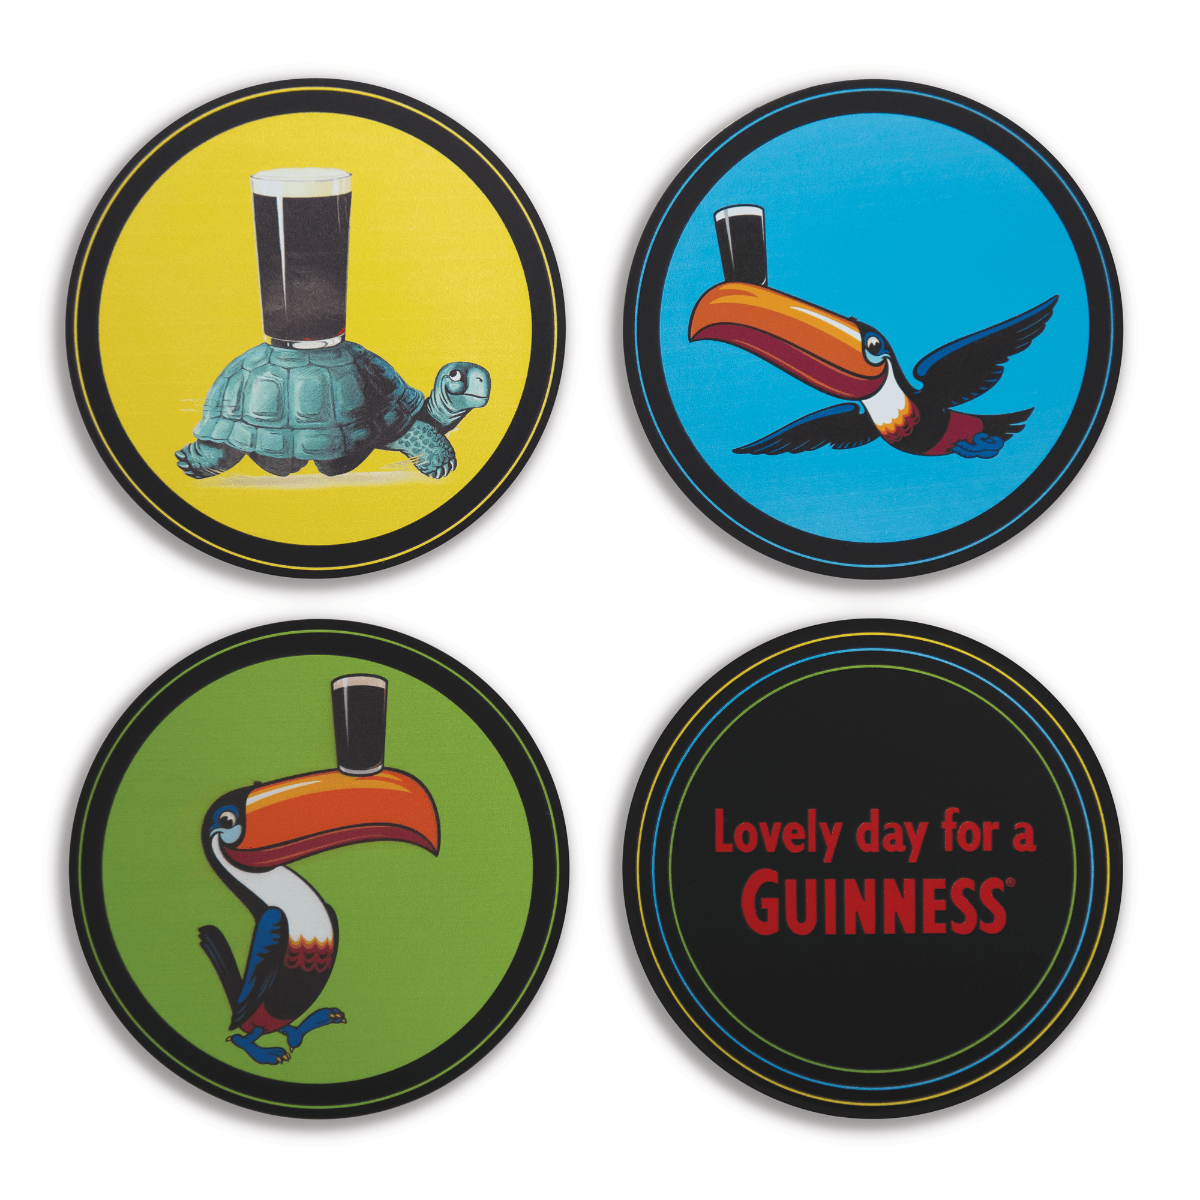 Guinness Ultimate Toucan Home Bar Pack coasters - set of 4. Perfect bar gift for Guinness enthusiasts, these coasters are great merchandise showcasing the iconic Guinness brand. The SEO keywords for this product are "Guinness" and "Guinness Ultimate Toucan Home Bar Pack".